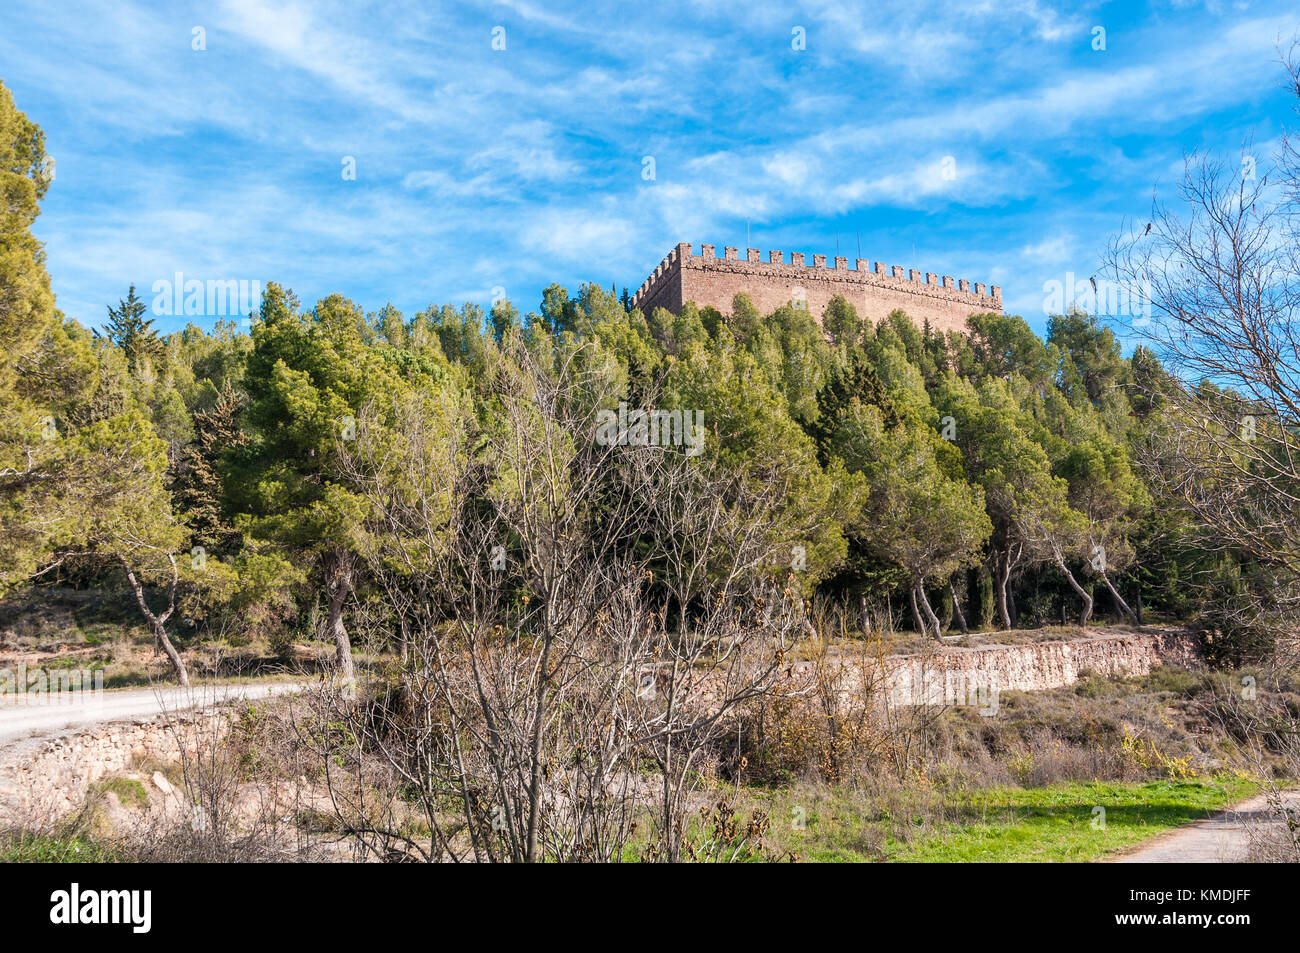 Balsareny castle, gothic style fortress dated in 931 and located above a hill in the city of Balsareny, Catalonia Stock Photo